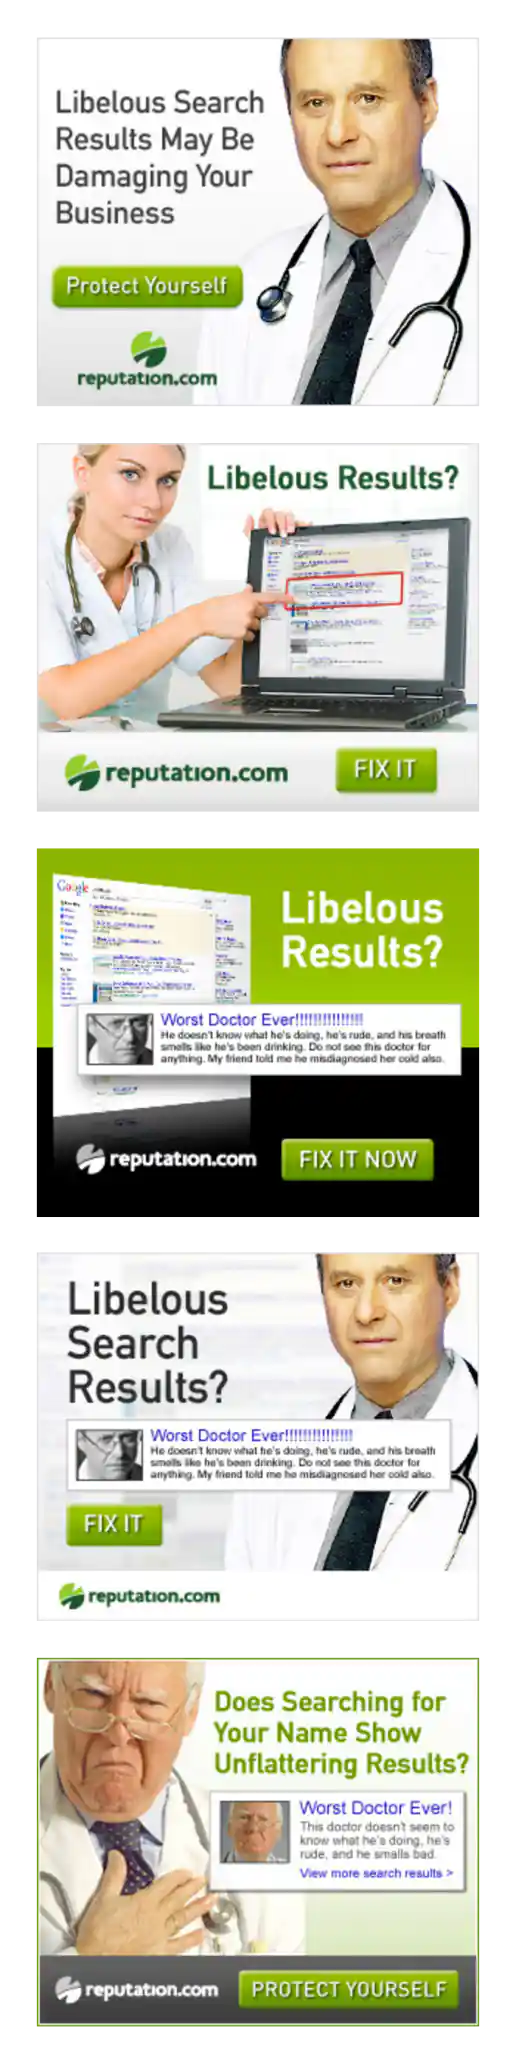 Reputation.com Fix Libelous Search Results Banner Ad Directions